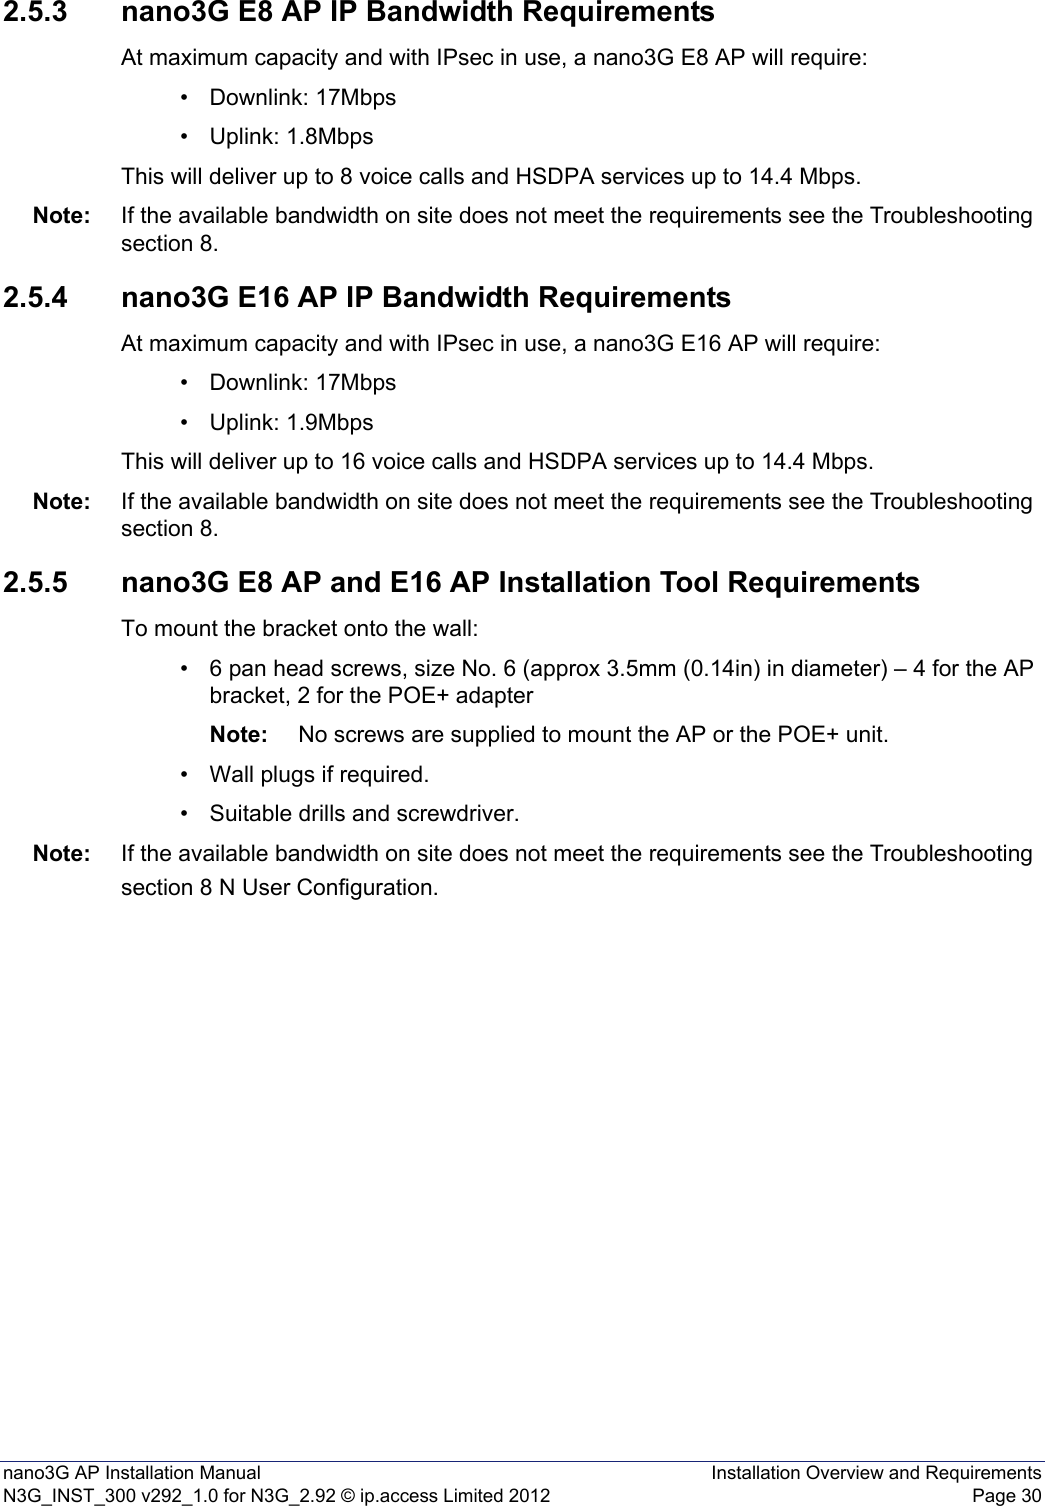 nano3G AP Installation Manual Installation Overview and RequirementsN3G_INST_300 v292_1.0 for N3G_2.92 © ip.access Limited 2012 Page 302.5.3 nano3G E8 AP IP Bandwidth RequirementsAt maximum capacity and with IPsec in use, a nano3G E8 AP will require:• Downlink: 17Mbps• Uplink: 1.8MbpsThis will deliver up to 8 voice calls and HSDPA services up to 14.4 Mbps.Note: If the available bandwidth on site does not meet the requirements see the Troubleshooting section 8.2.5.4 nano3G E16 AP IP Bandwidth RequirementsAt maximum capacity and with IPsec in use, a nano3G E16 AP will require:• Downlink: 17Mbps• Uplink: 1.9MbpsThis will deliver up to 16 voice calls and HSDPA services up to 14.4 Mbps.Note: If the available bandwidth on site does not meet the requirements see the Troubleshooting section 8.2.5.5 nano3G E8 AP and E16 AP Installation Tool RequirementsTo mount the bracket onto the wall:• 6 pan head screws, size No. 6 (approx 3.5mm (0.14in) in diameter) – 4 for the AP bracket, 2 for the POE+ adapterNote: No screws are supplied to mount the AP or the POE+ unit.• Wall plugs if required.• Suitable drills and screwdriver.Note: If the available bandwidth on site does not meet the requirements see the Troubleshooting section 8 N User Configuration.